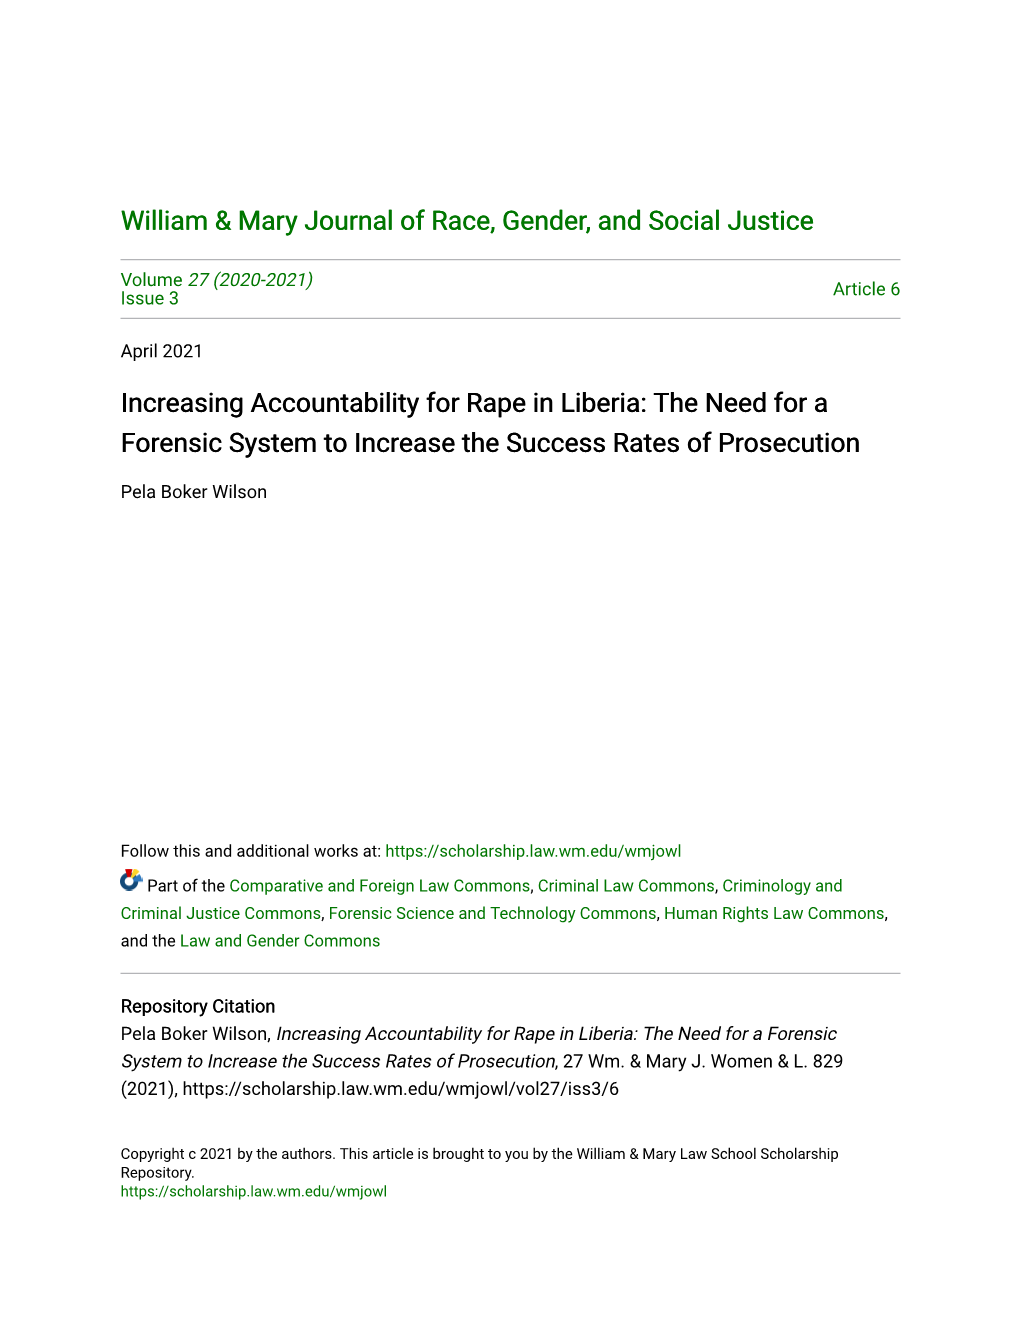 Increasing Accountability for Rape in Liberia: the Need for a Forensic System to Increase the Success Rates of Prosecution